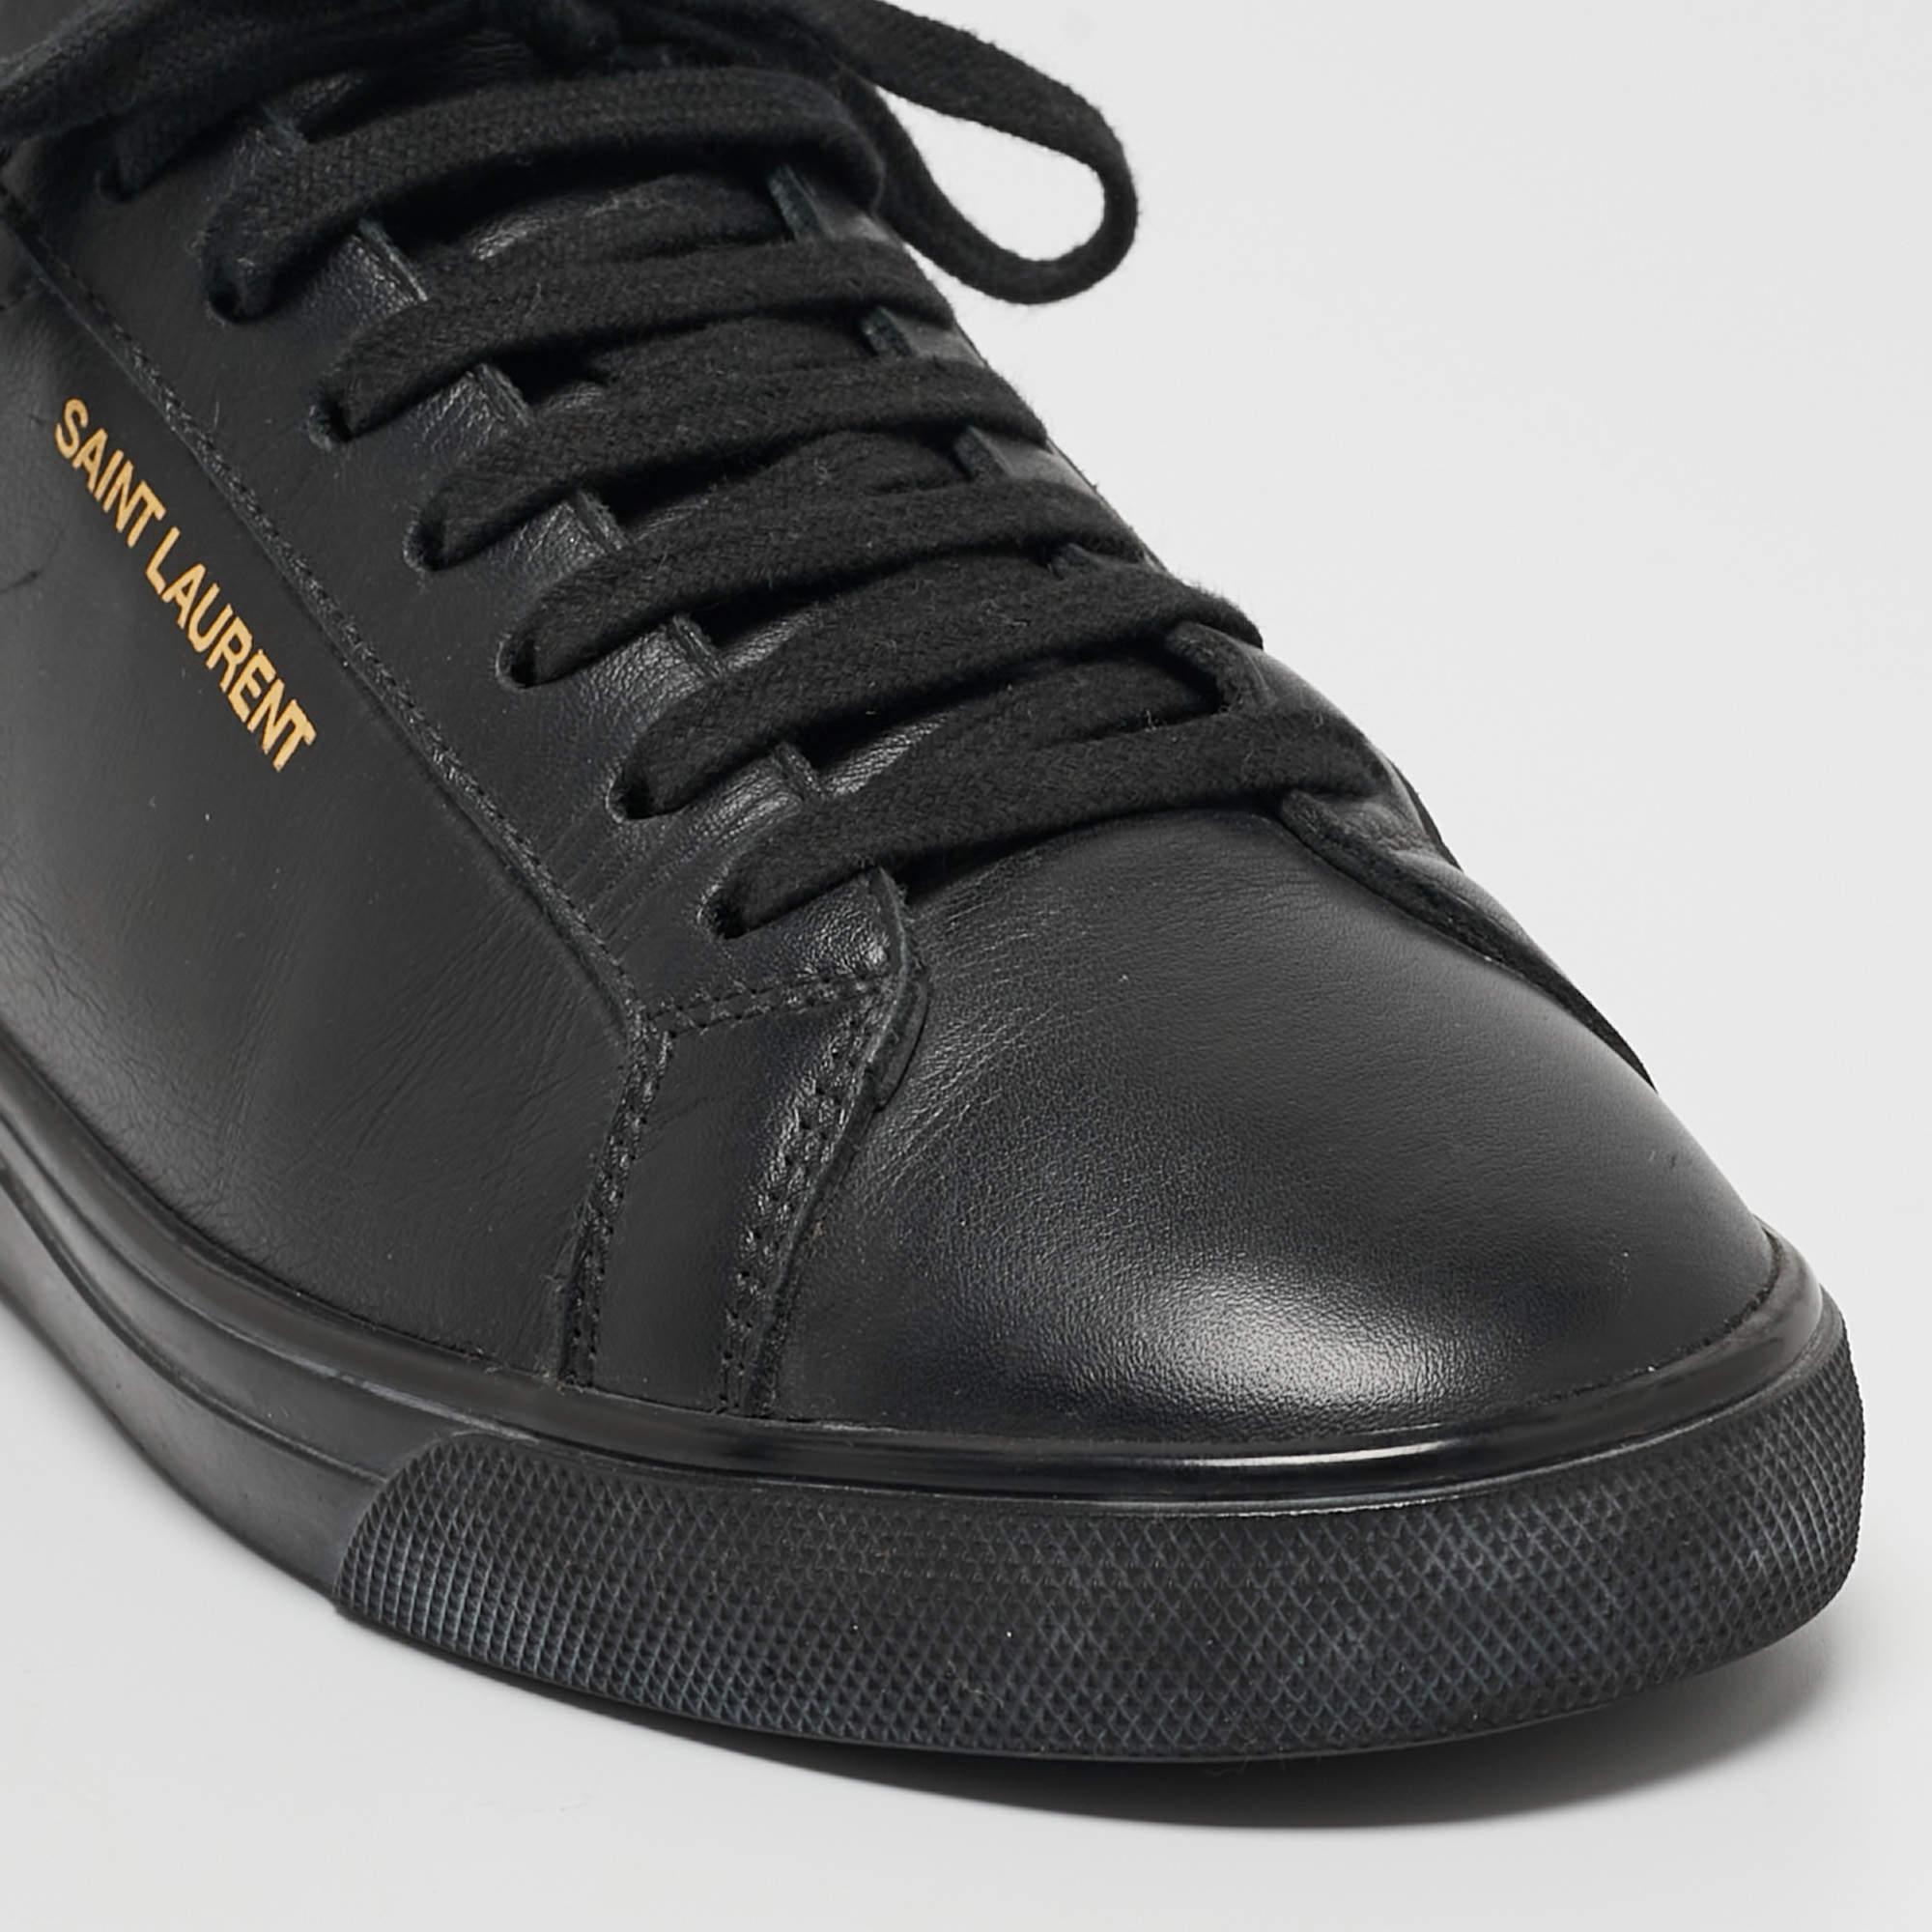 Saint Laurent Black Leather Andy Low Top Sneakers Size 37.5 For Sale 1